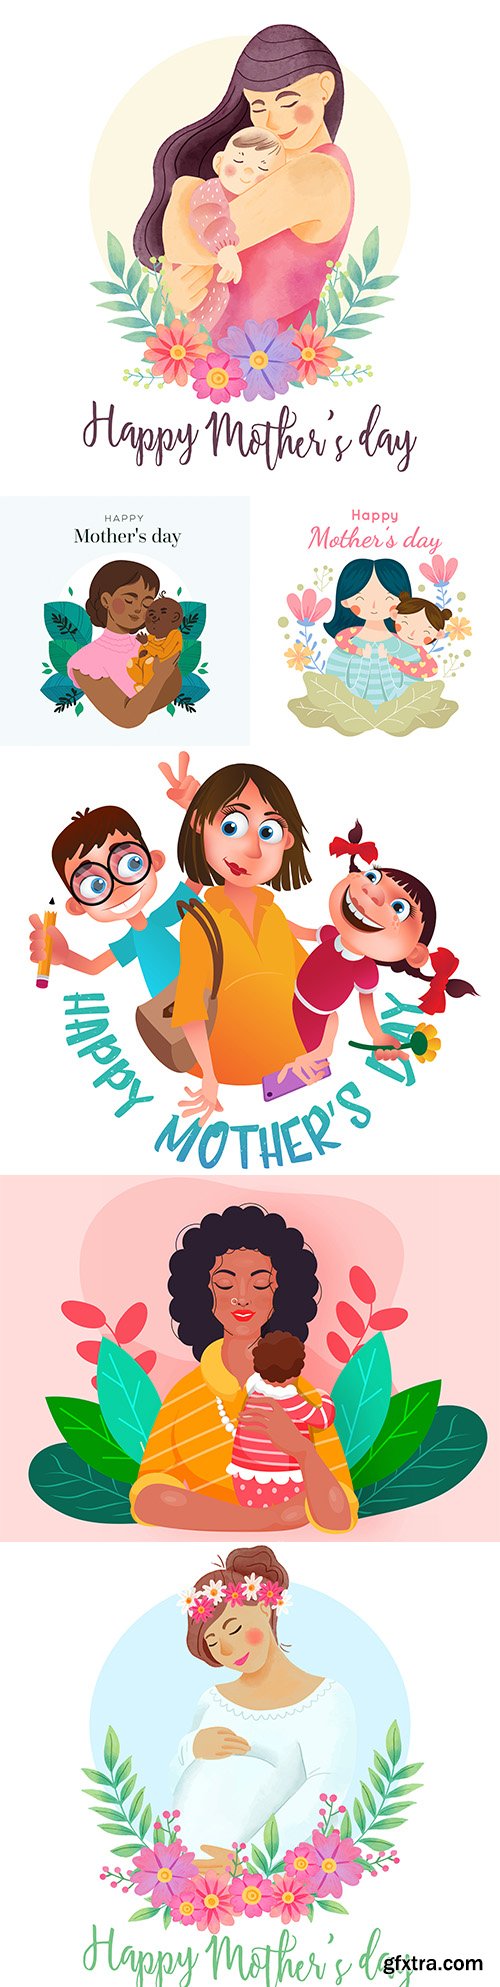 Happy Mother's day painted illustrations for design
